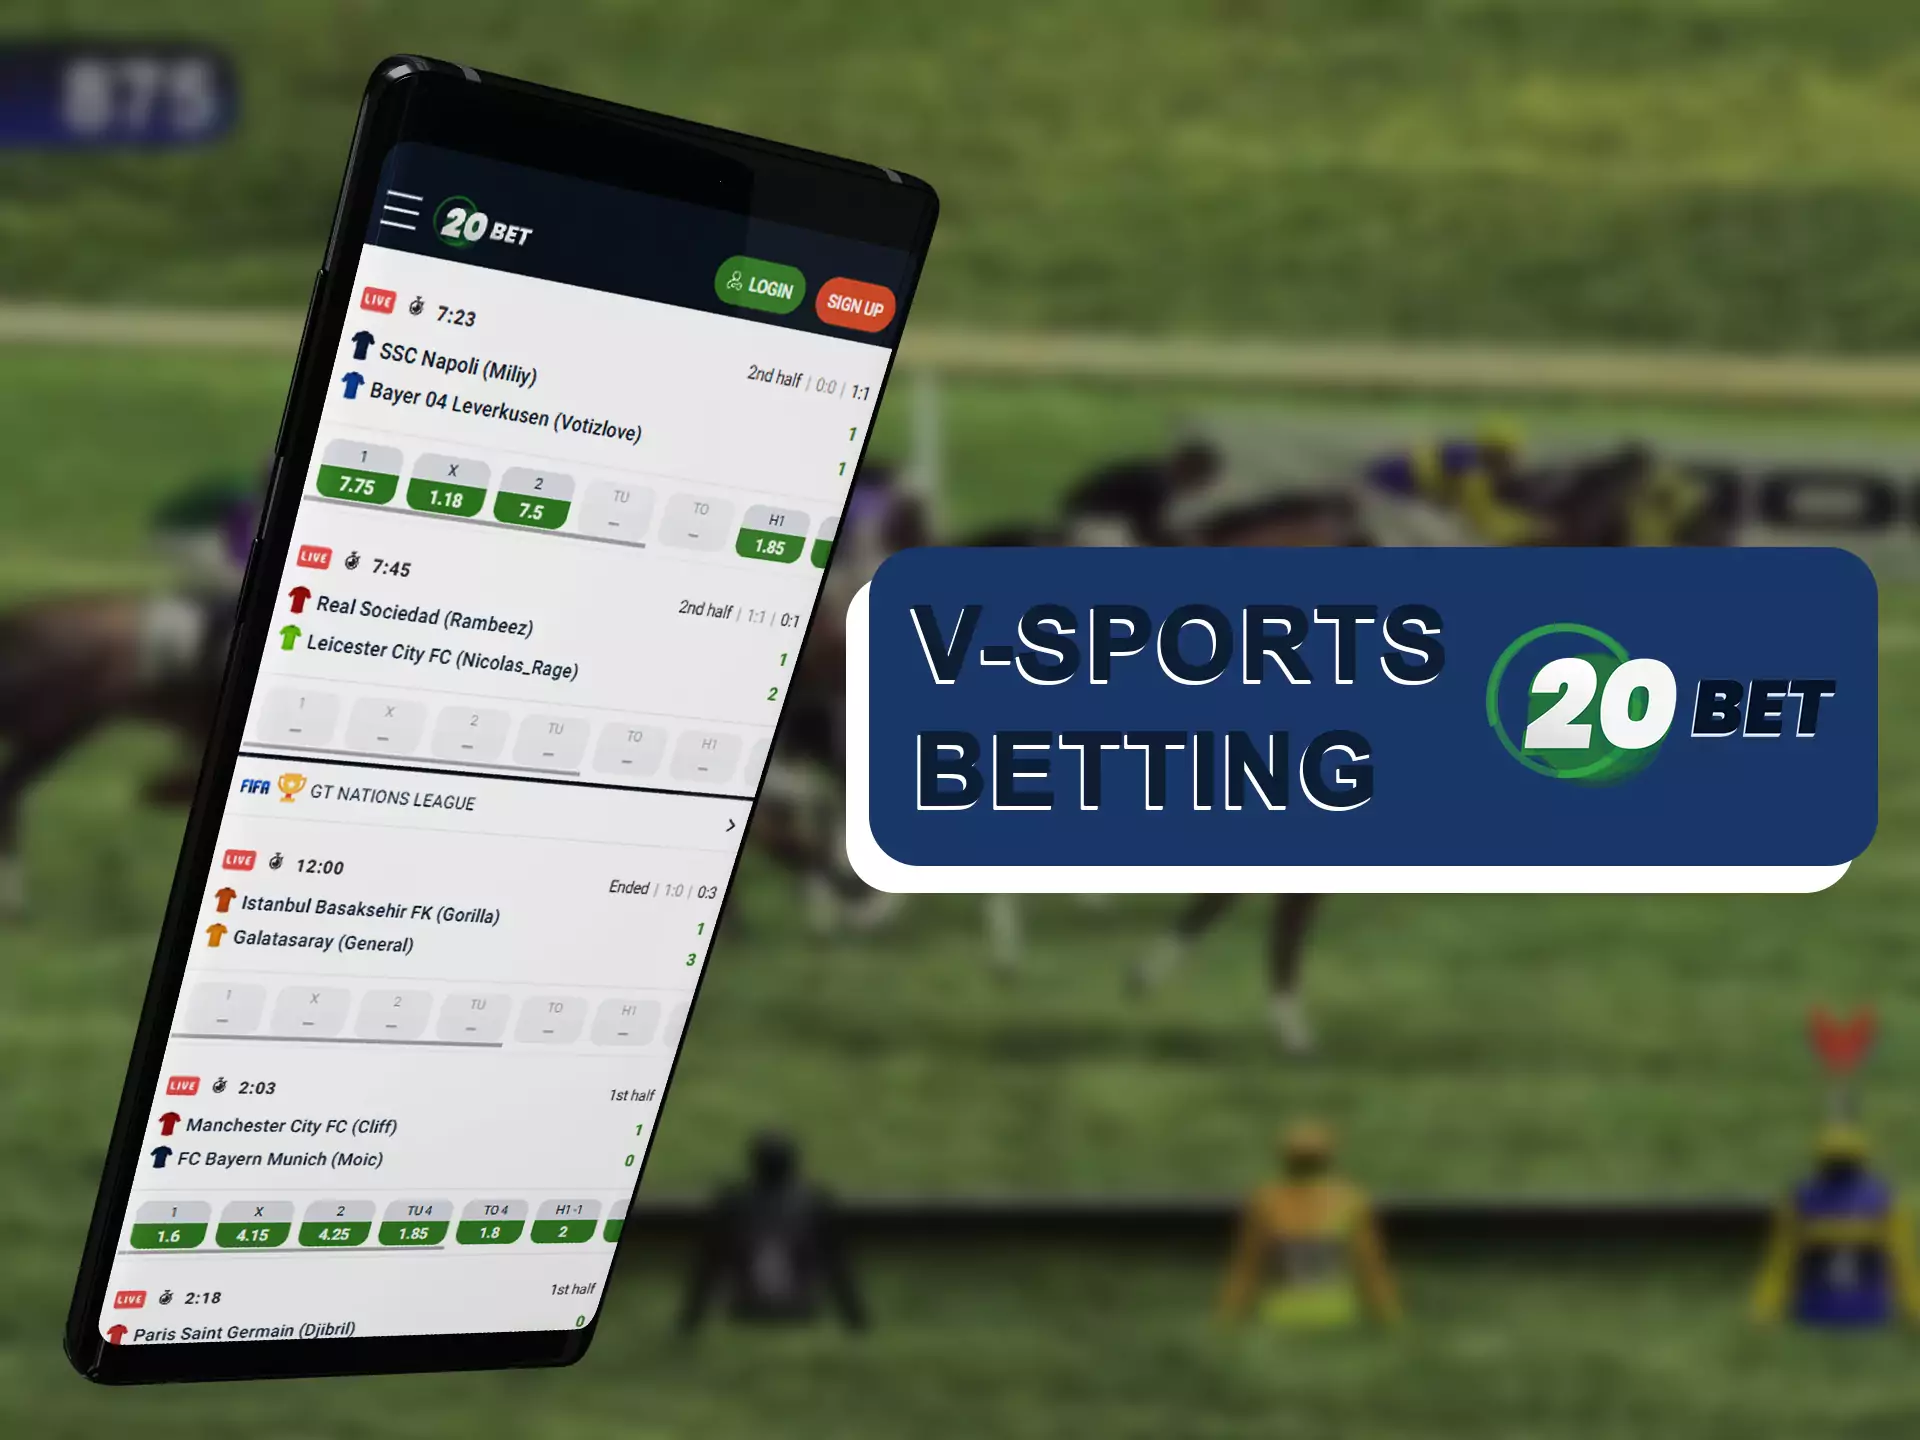 In 20bet app you can watch and bet different virtual sports.